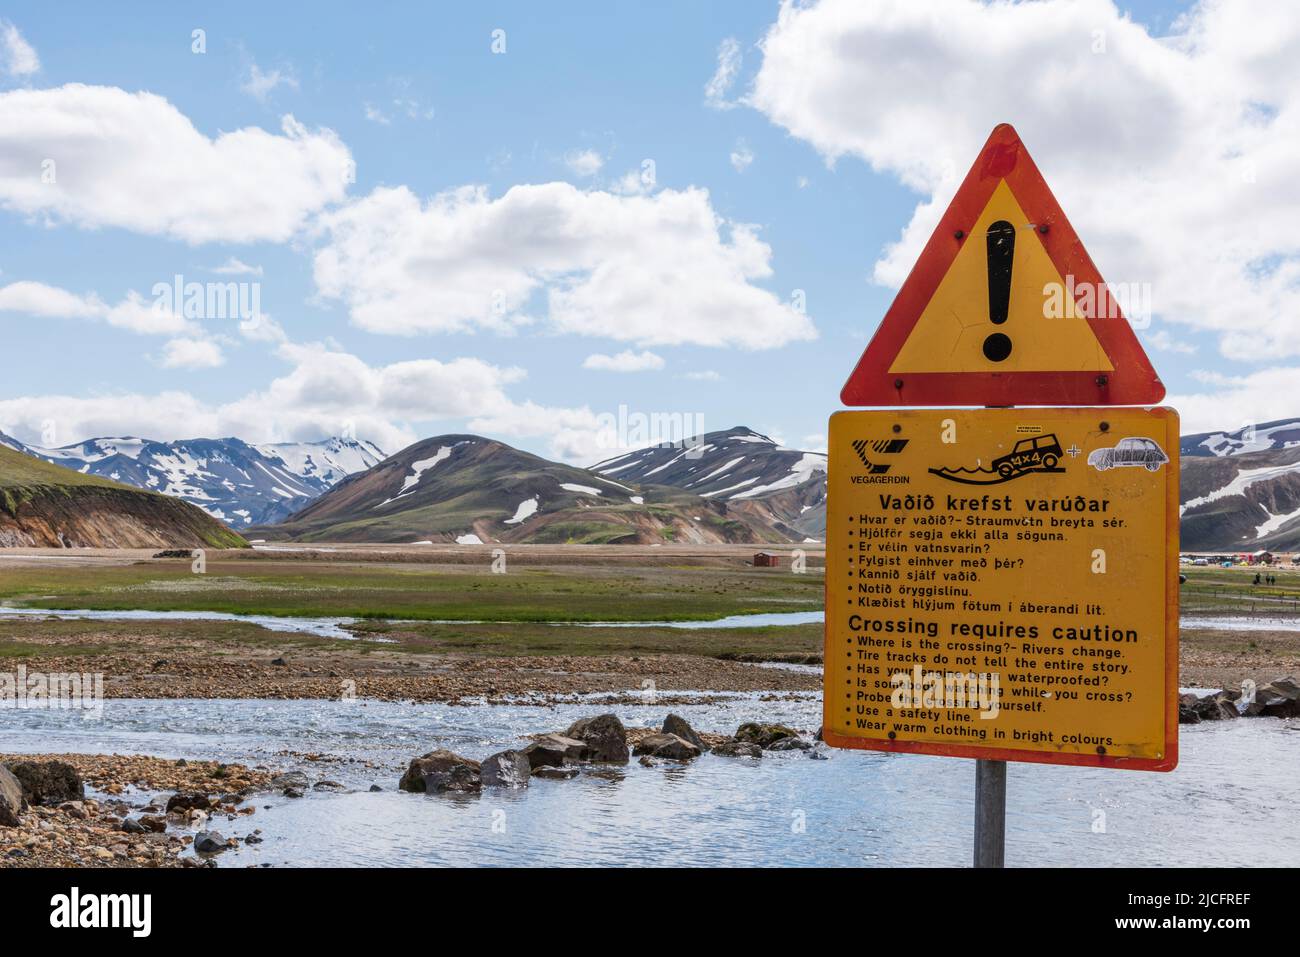 Laugavegur hiking trail is the most famous multi-day trekking tour in Iceland. Landscape shot from the area around Landmannalaugar, starting point of the long-distance hiking trail in the highlands of Iceland. Warning sign 'Crossing requires caution Stock Photo